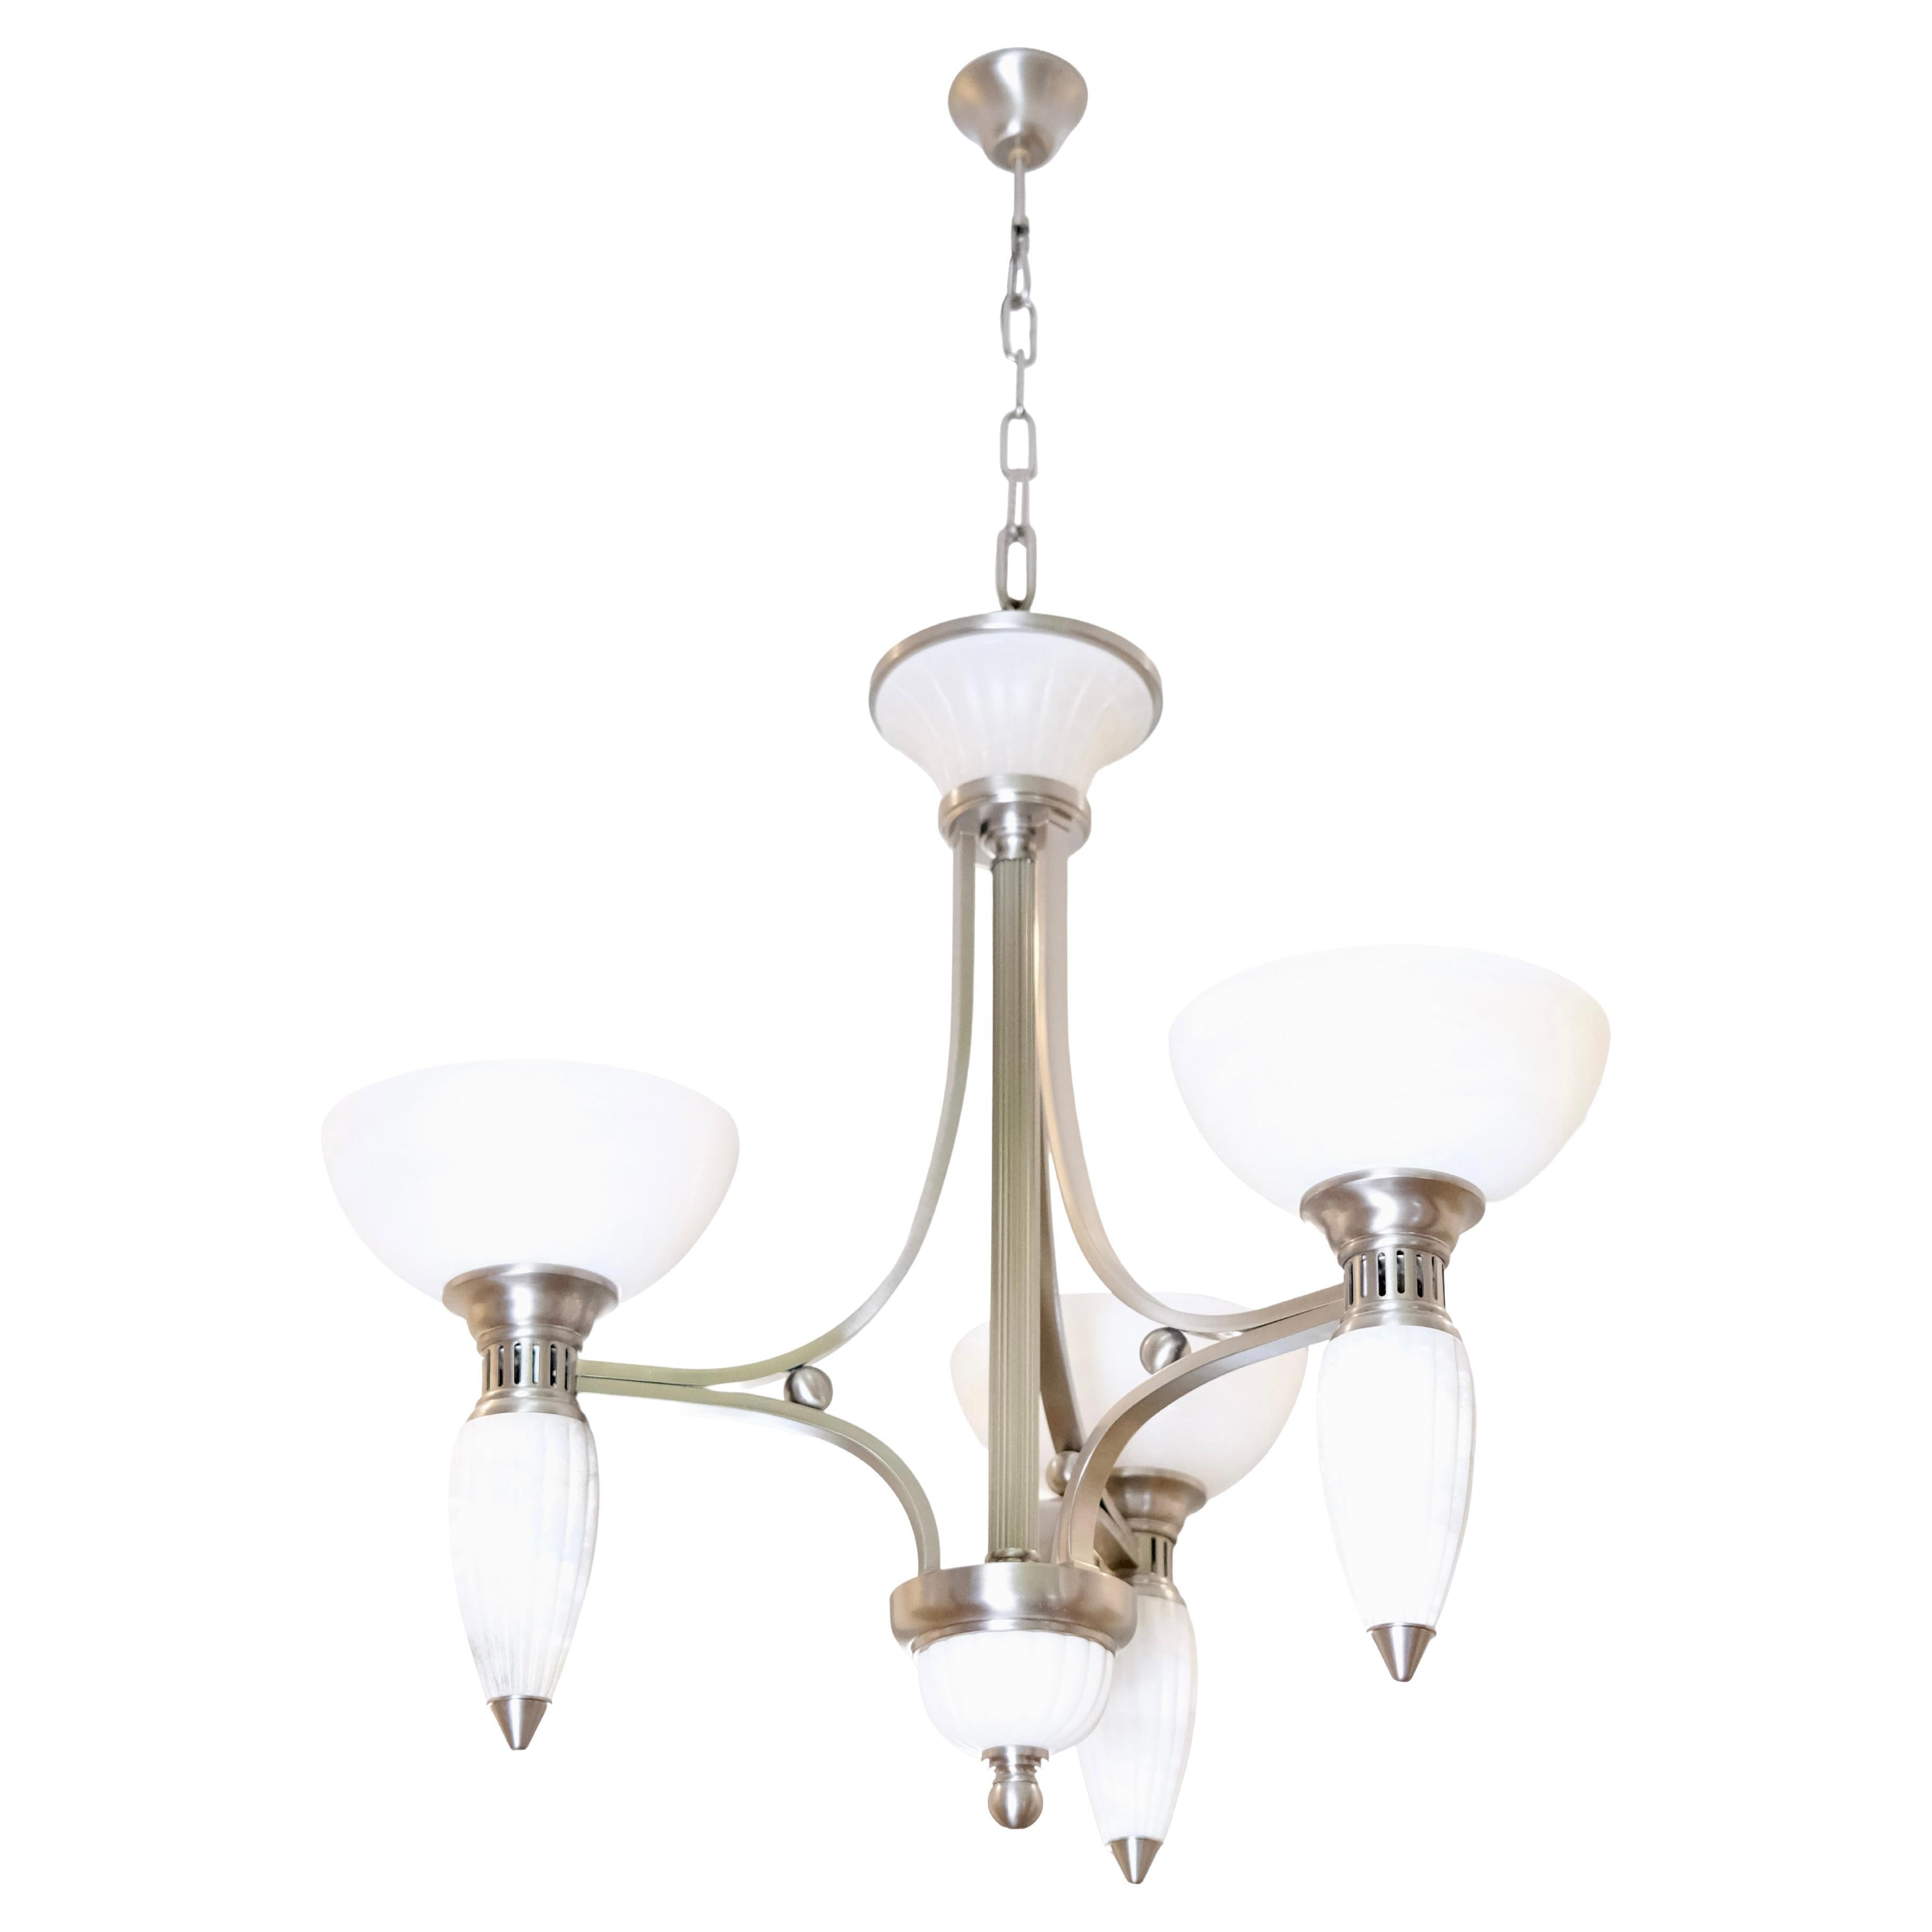 3-Arm Art Deco Style Chandelier with Alabaster Bowls and Illuminated Cones